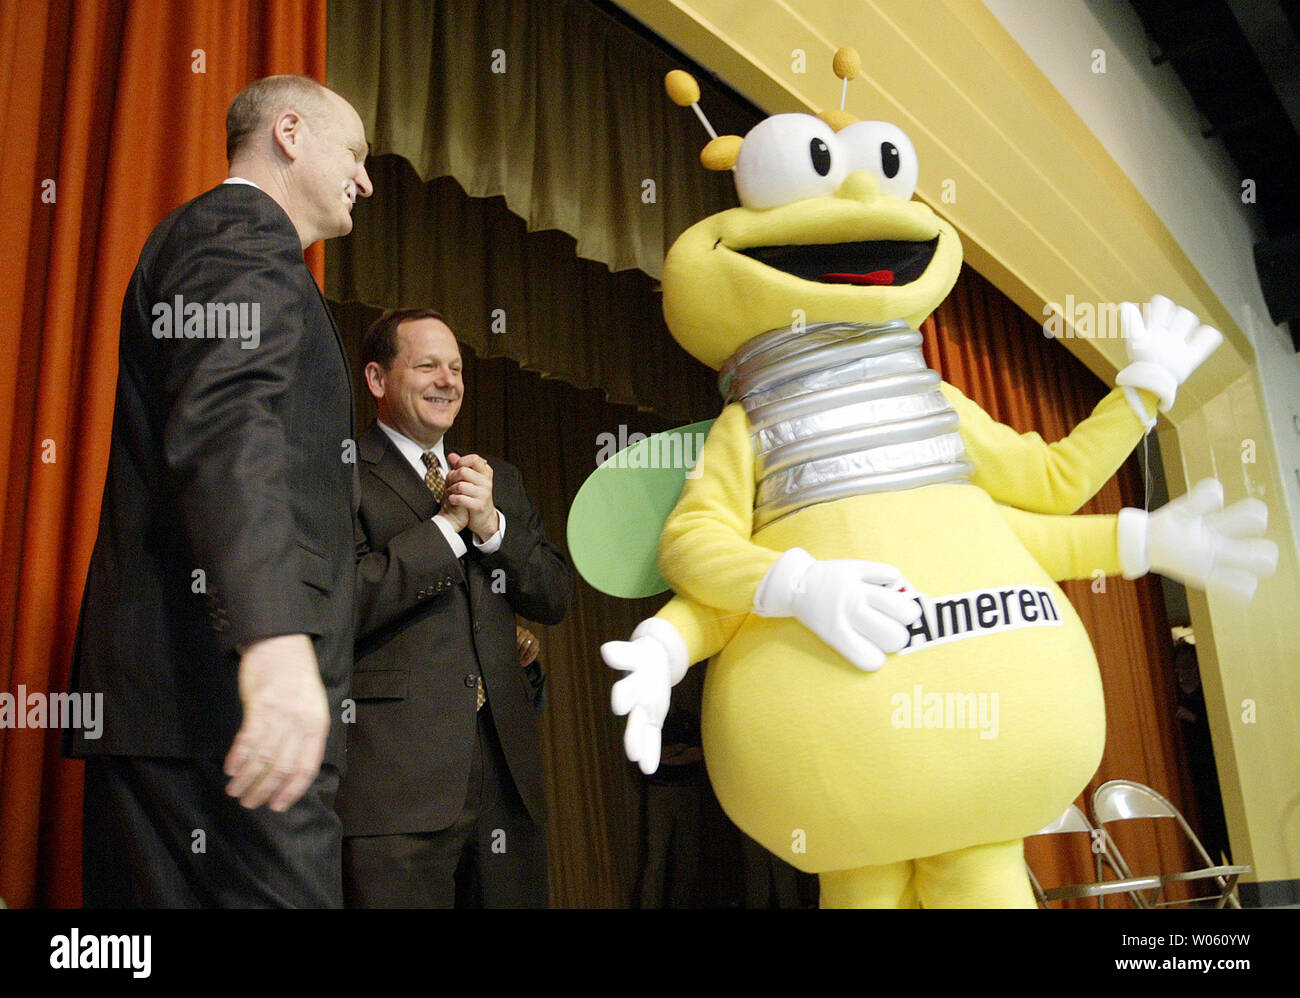 https://c8.alamy.com/comp/W060YW/louie-the-lightning-bug-greets-gary-rainwater-ceo-and-president-of-ameren-l-st-louis-mayor-francis-slay-and-the-children-at-the-peabody-school-in-st-louis-on-march-1-2005-louie-ameren-electric-companys-safety-spokes-bug-was-joined-by-other-area-mascots-to-tell-the-hazards-of-down-power-lines-and-flying-kites-near-power-lines-upi-photobill-greenblatt-W060YW.jpg